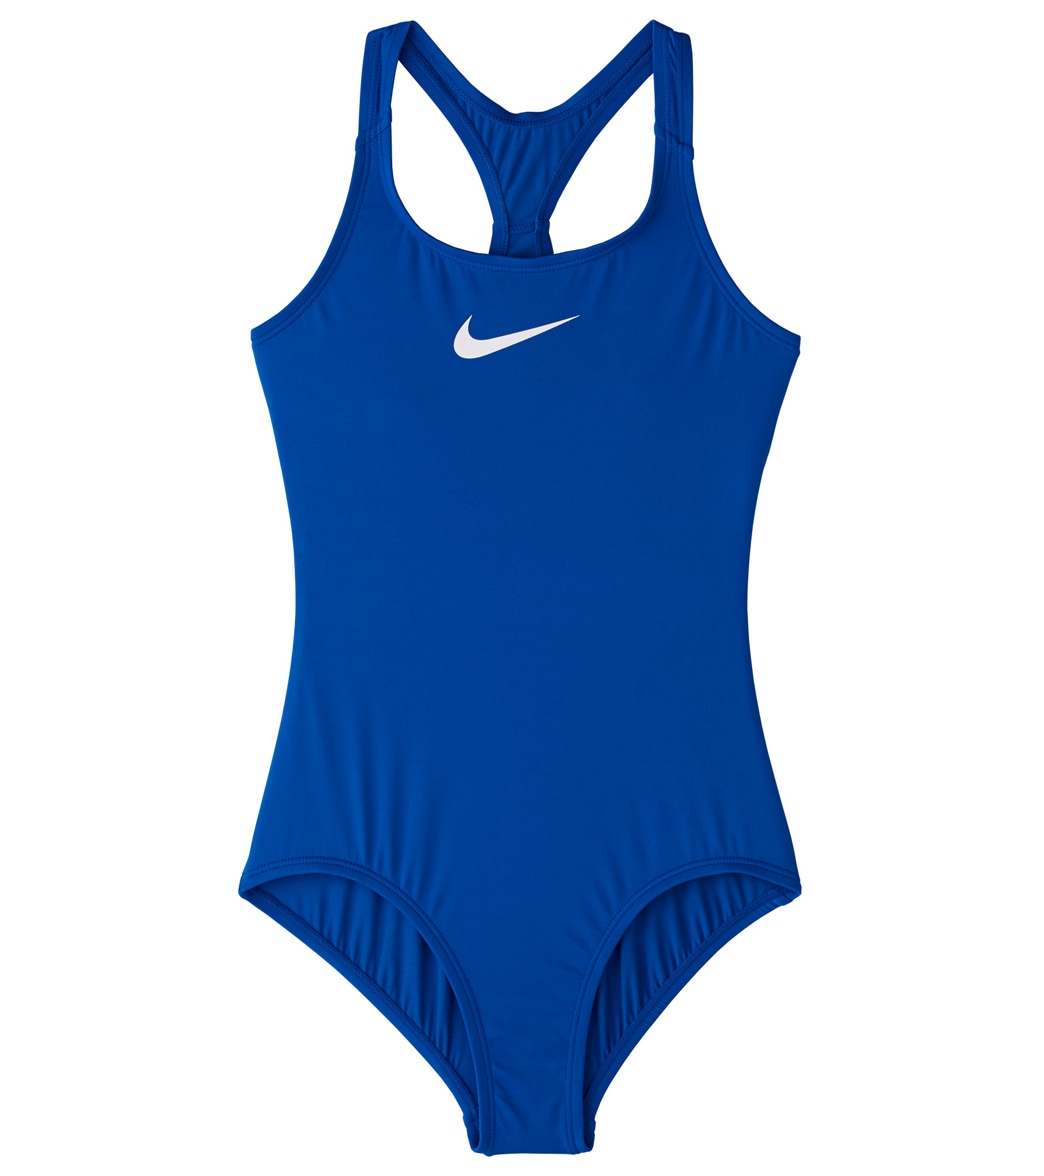 Nike Girls' Racerback One Piece Swimsuit (Big Kid) at SwimOutlet.com